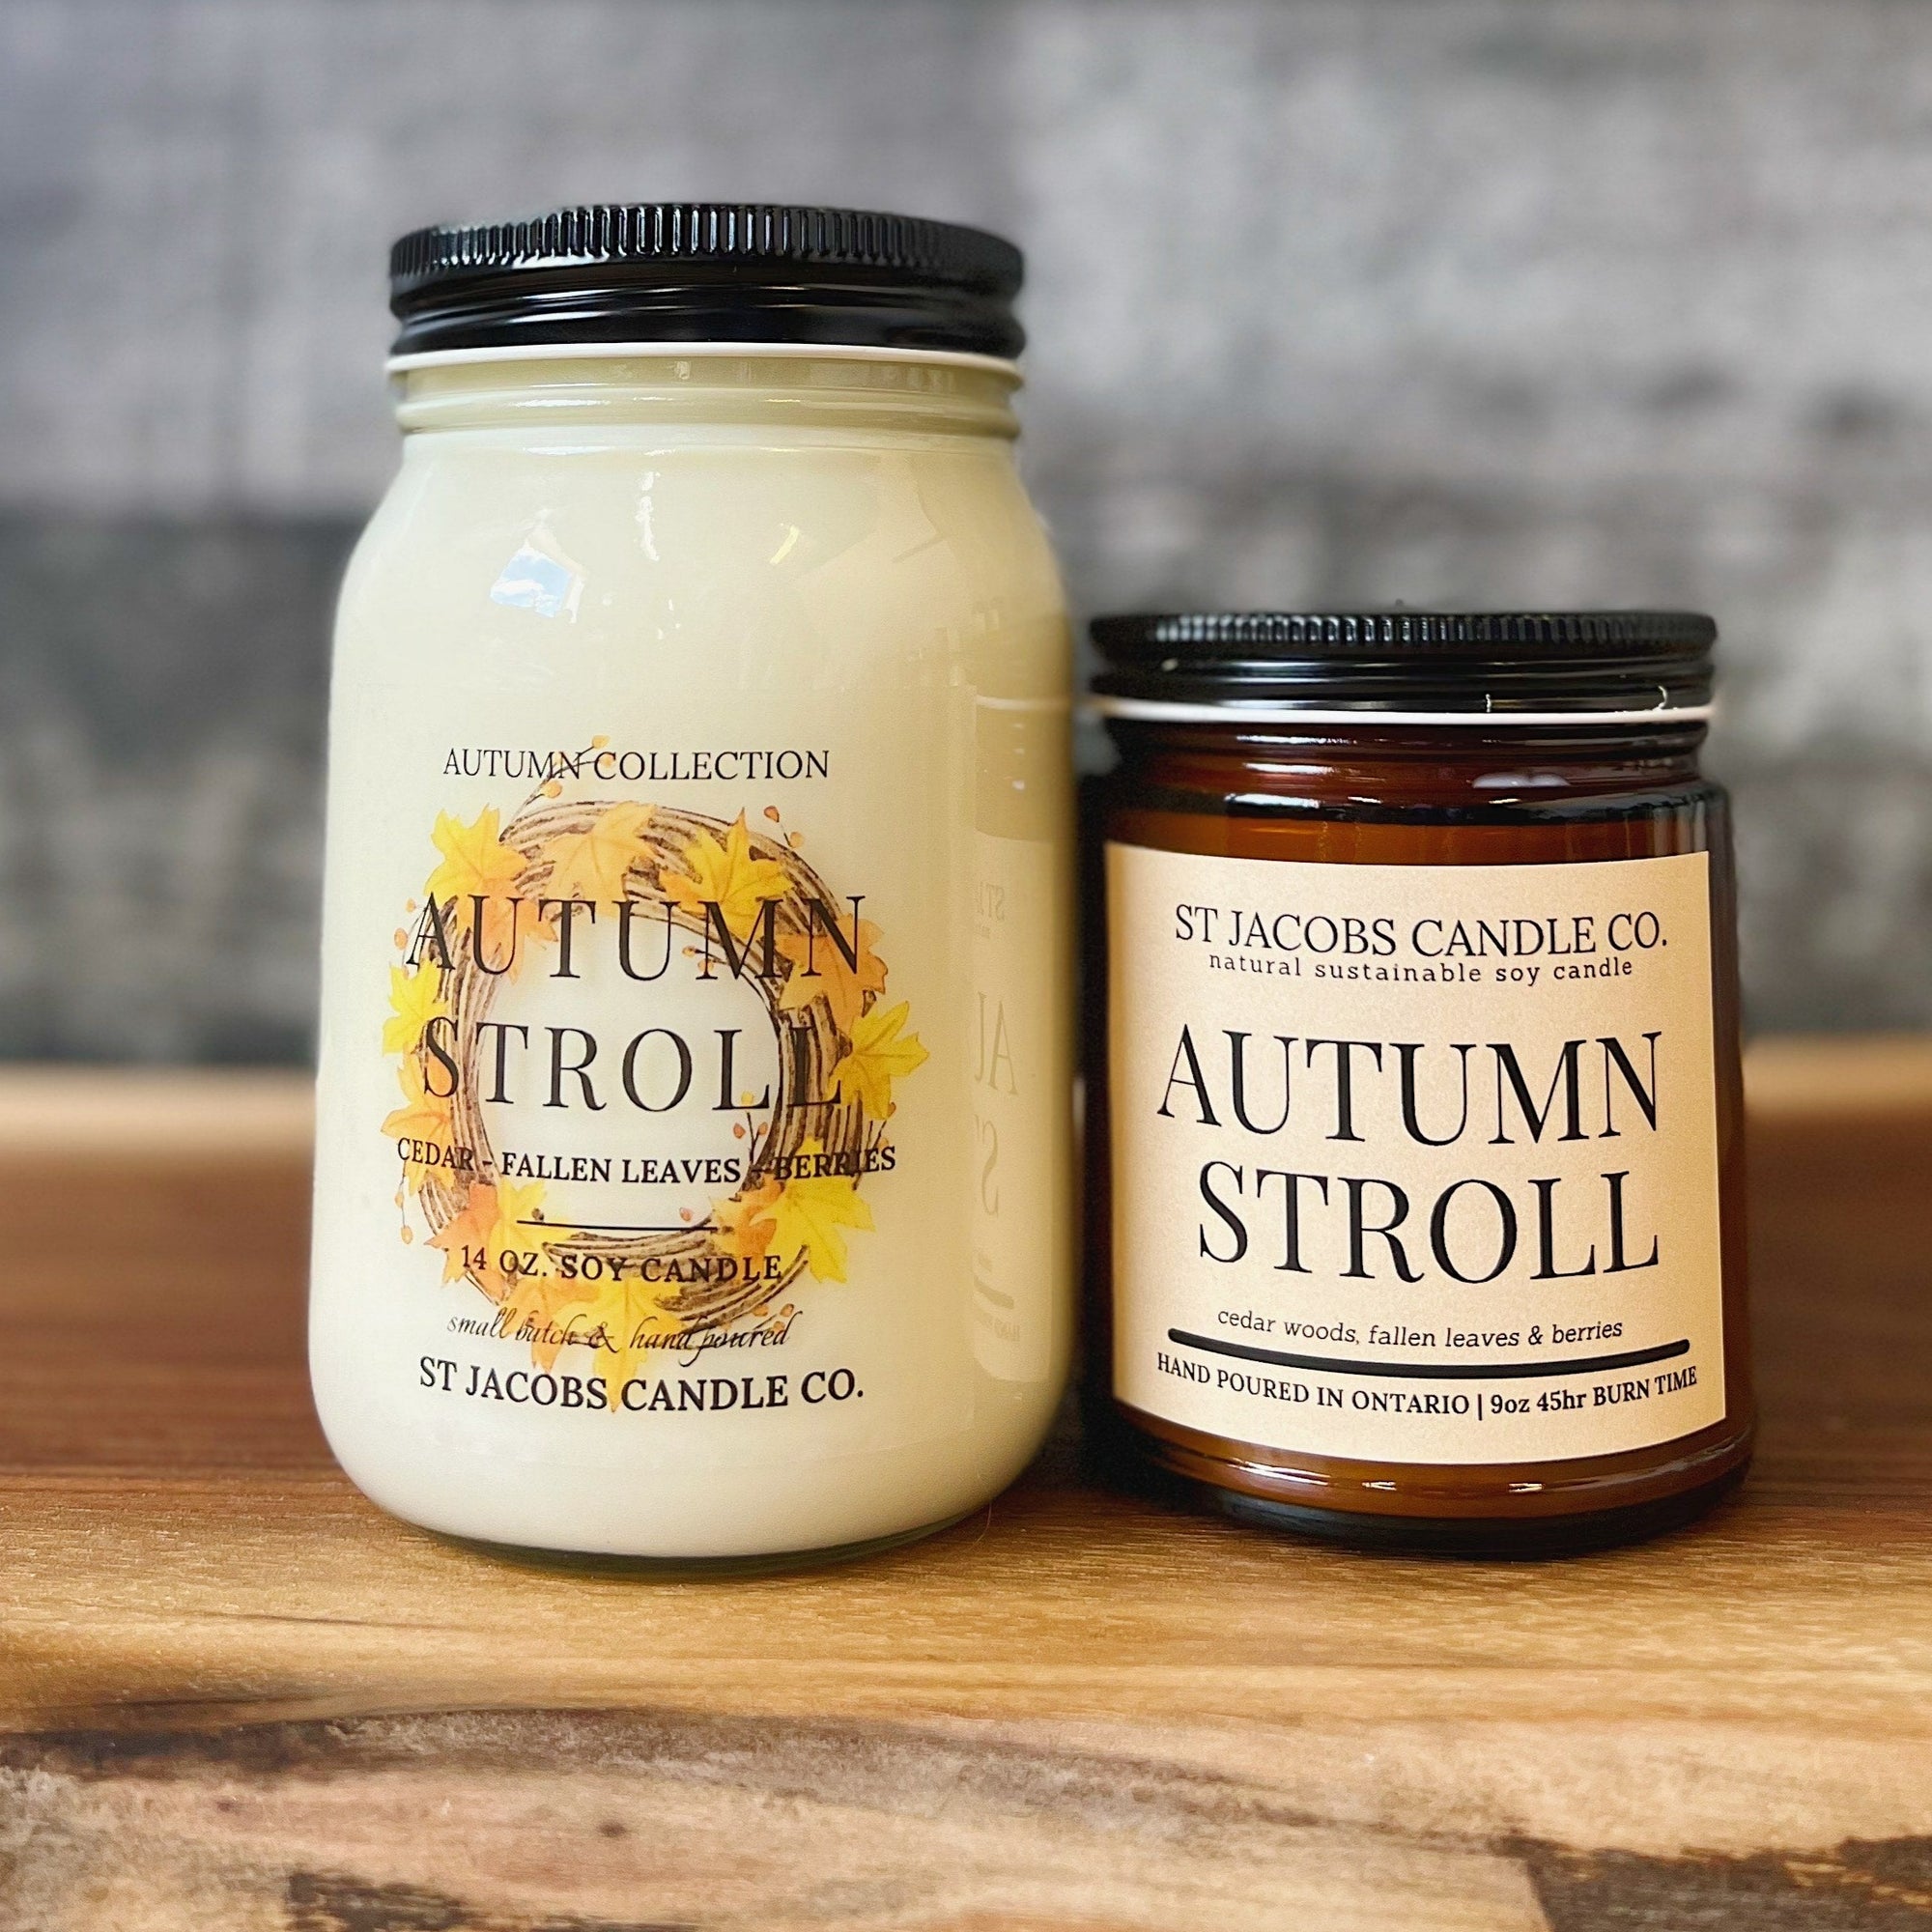 AUTUMN STROLL 🍂 Autumn 2022 Soy Candle Collection